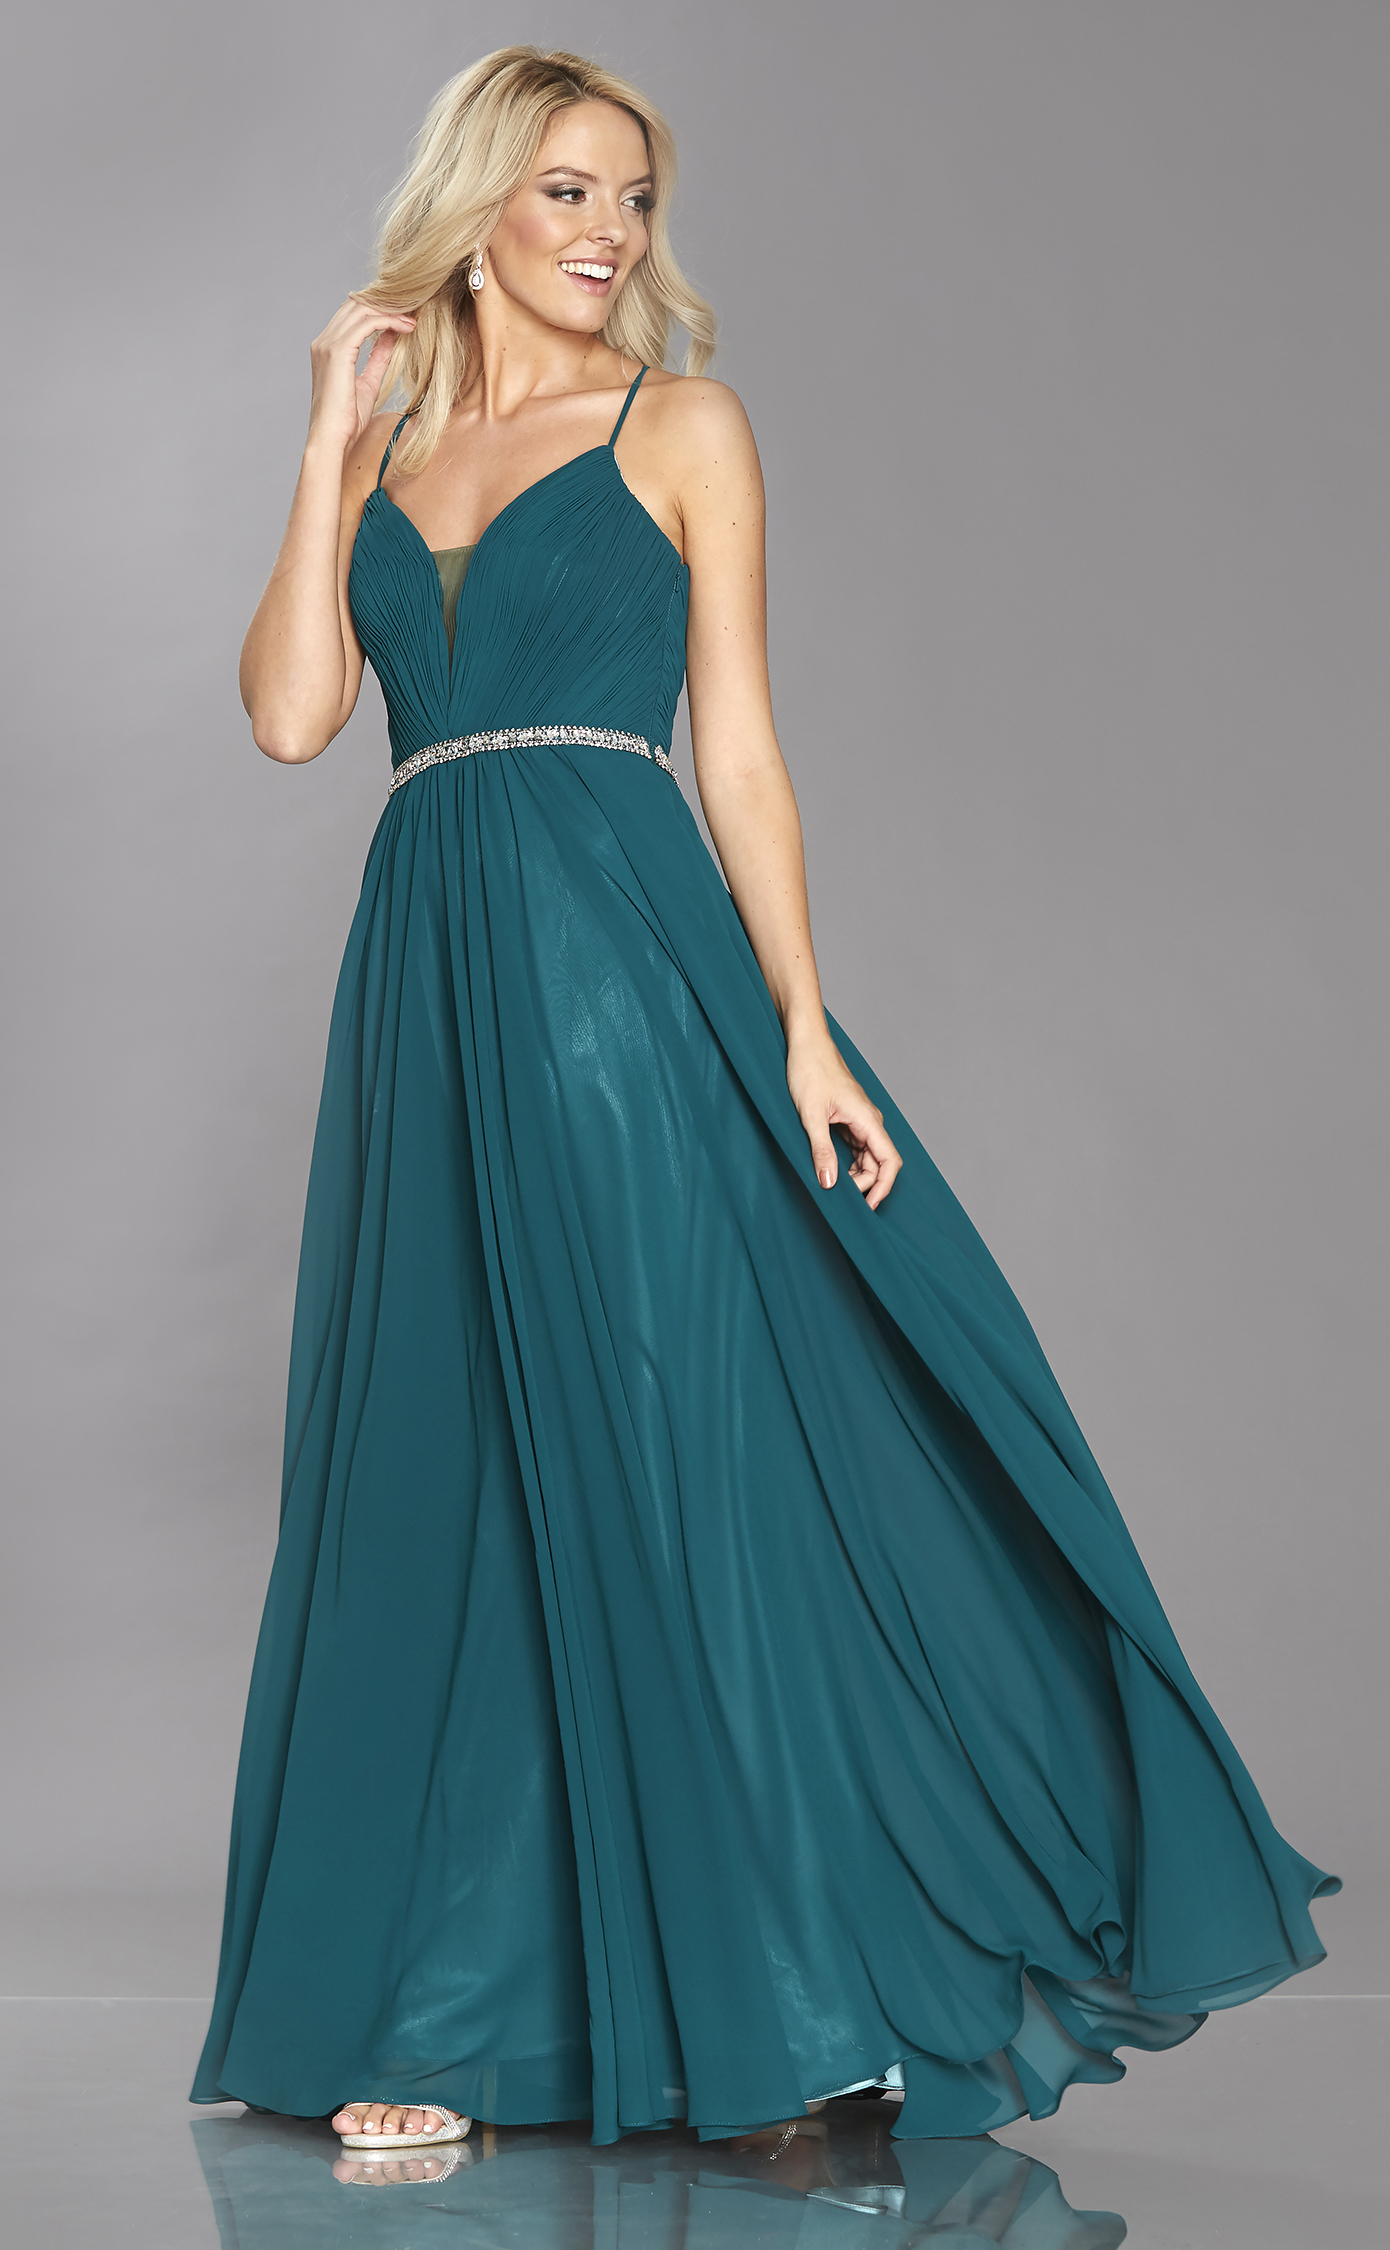 Grecian chiffon prom dress with laced back at Ball Gown Heaven